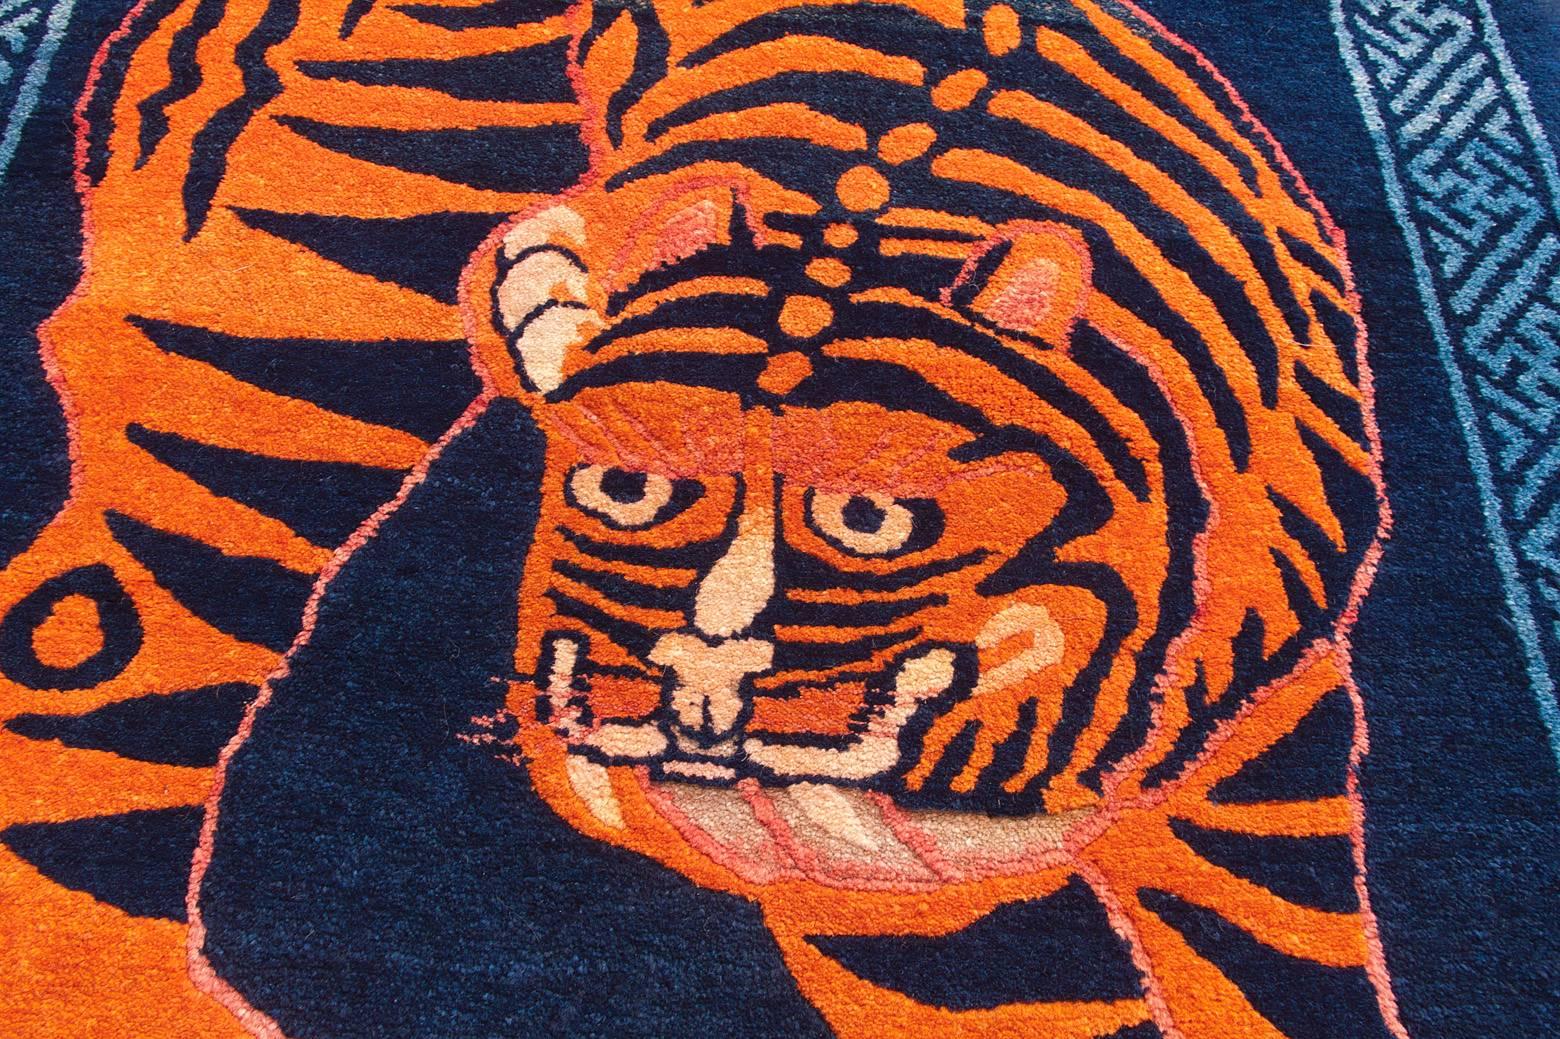 ***Autumn SALE***
Tibetan tiger rugs are generally associated with tantric rituals whilst Chinese tiger rugs celebrate the fierceness and courage of the tiger as the protector against demons and evil spirits. 

This powerful tiger is just turning